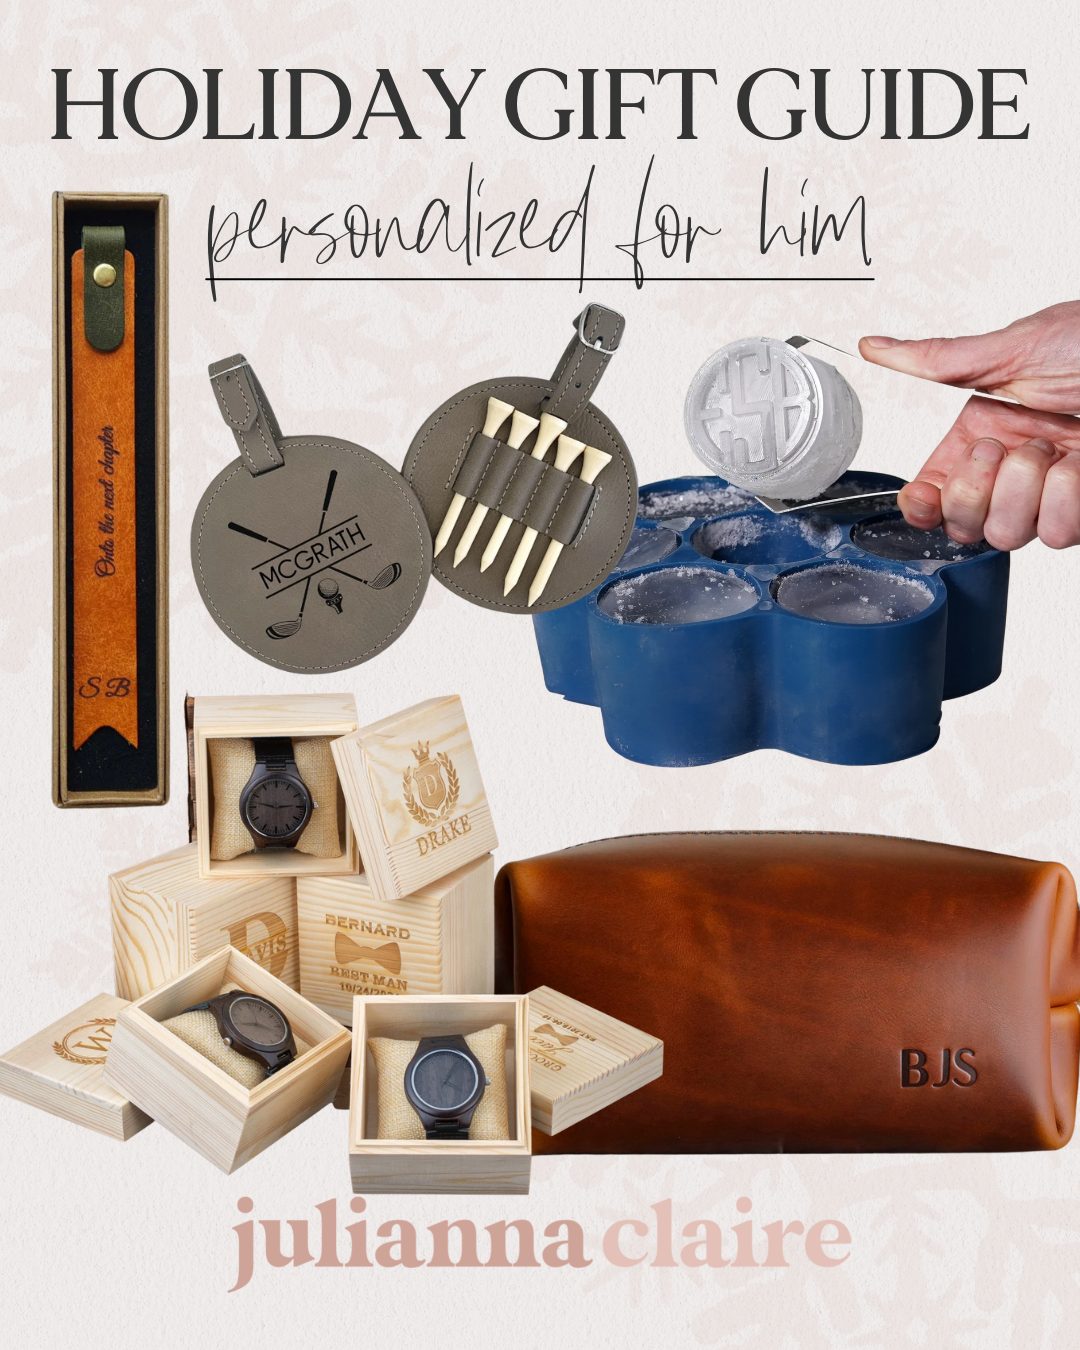 personalized gift ideas for him